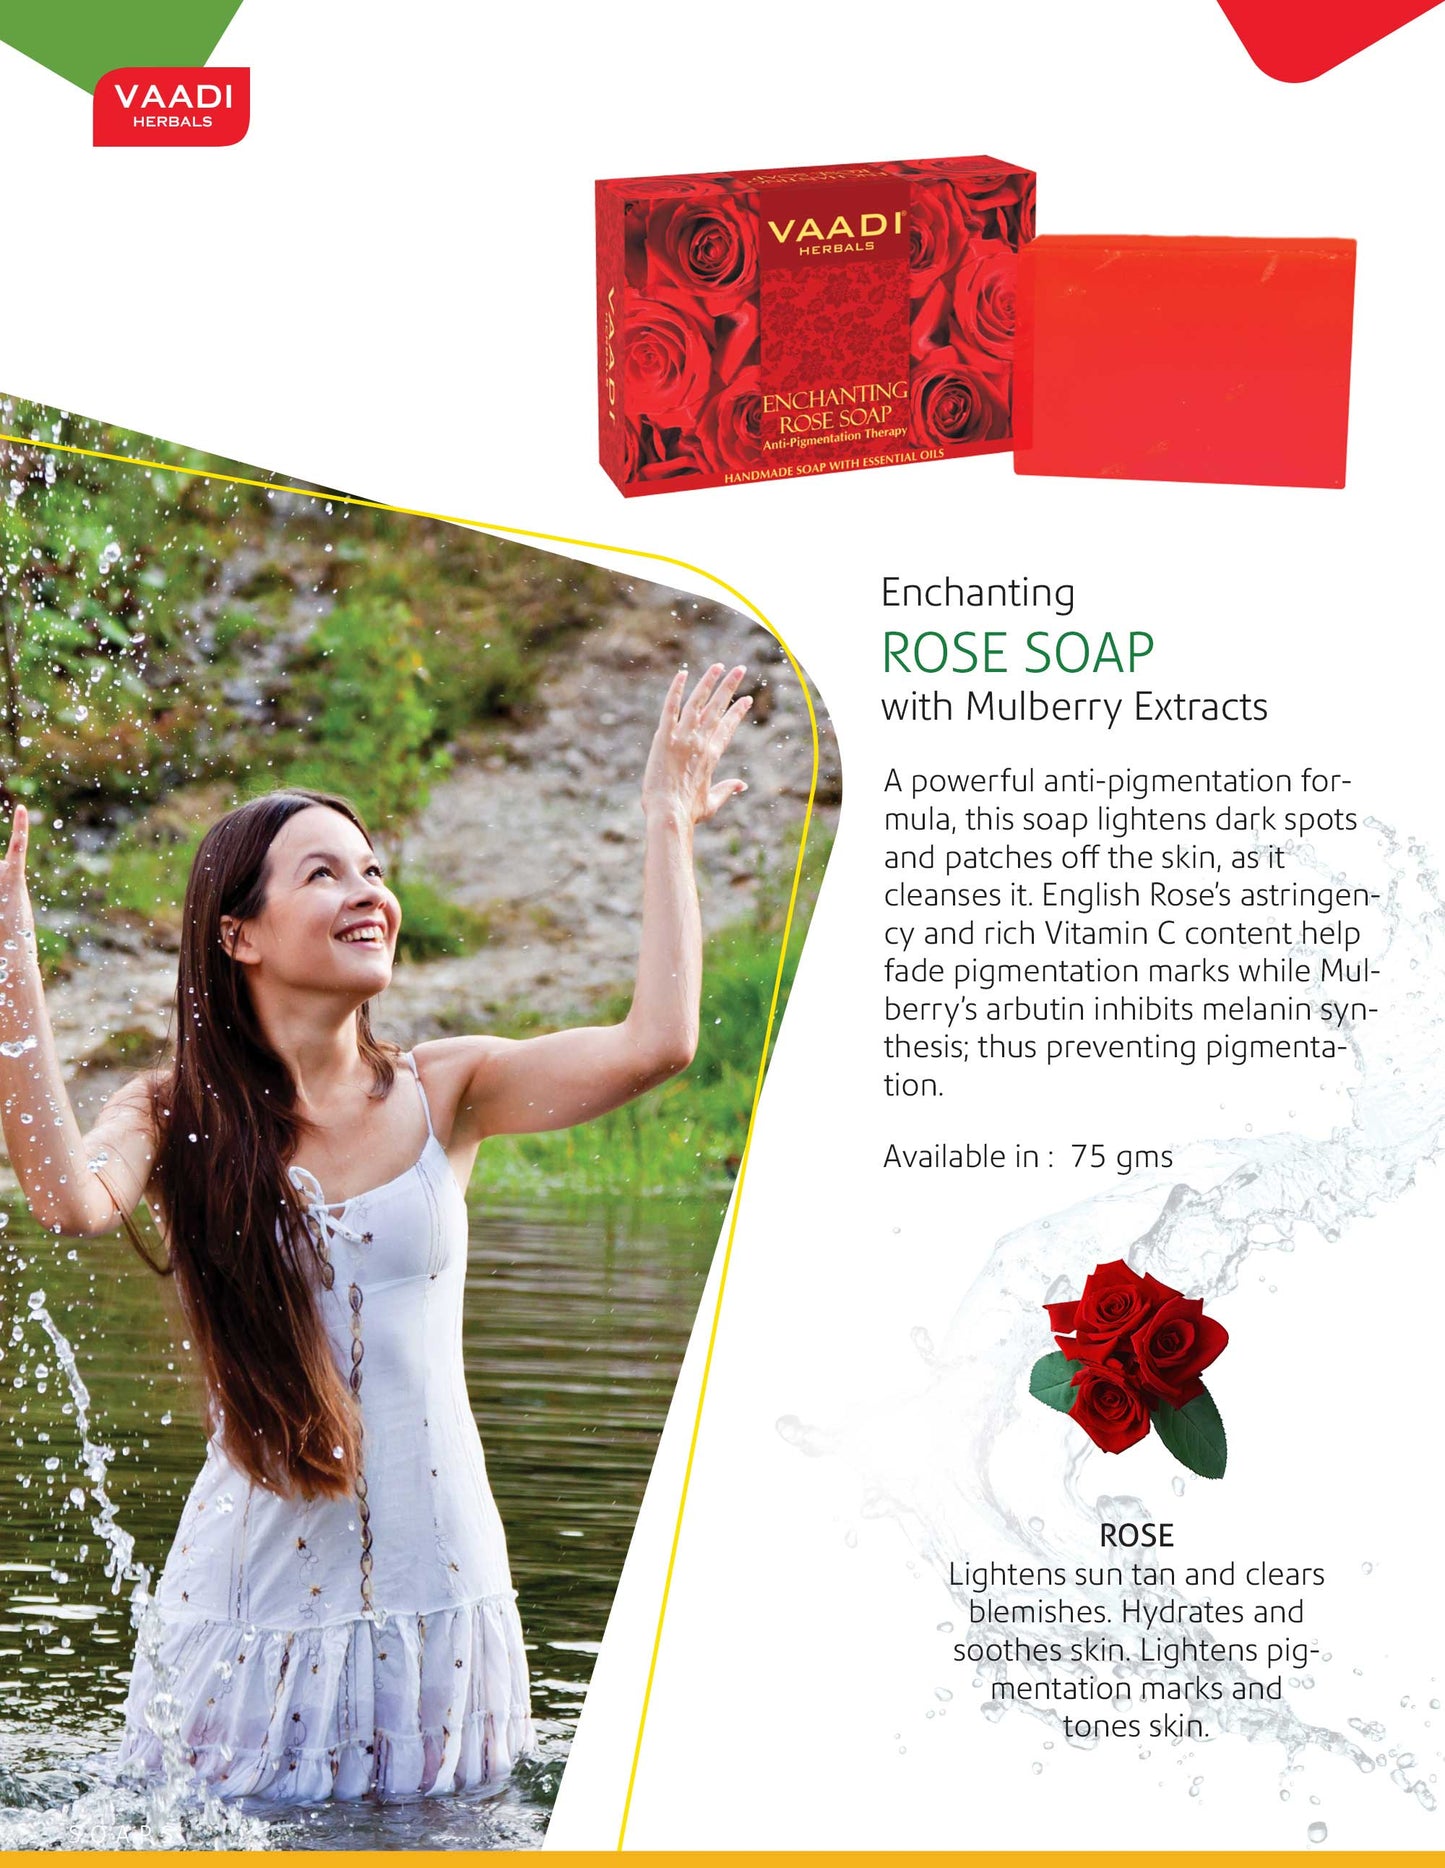 Enchanting Organic Rose Soap with Mulberry Extract - Anti Pigmentation Therapy - Reduce Dark Spots & Patches (3 x 75 gms/2.7 oz)